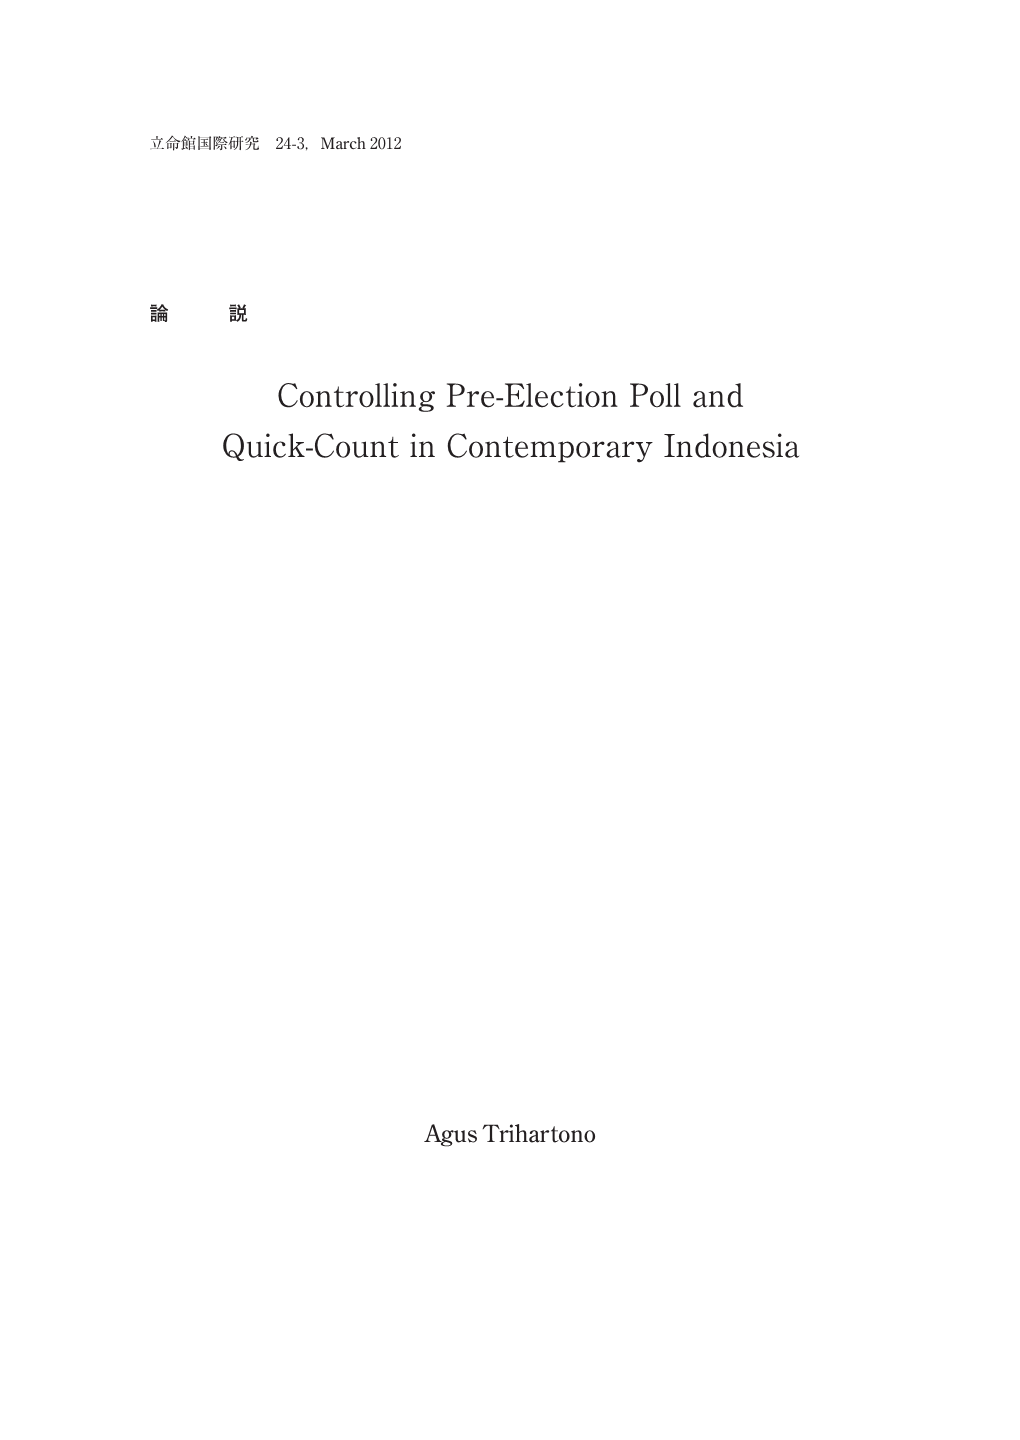 Controlling Pre-Election Poll and Quick-Count in Contemporary Indonesia